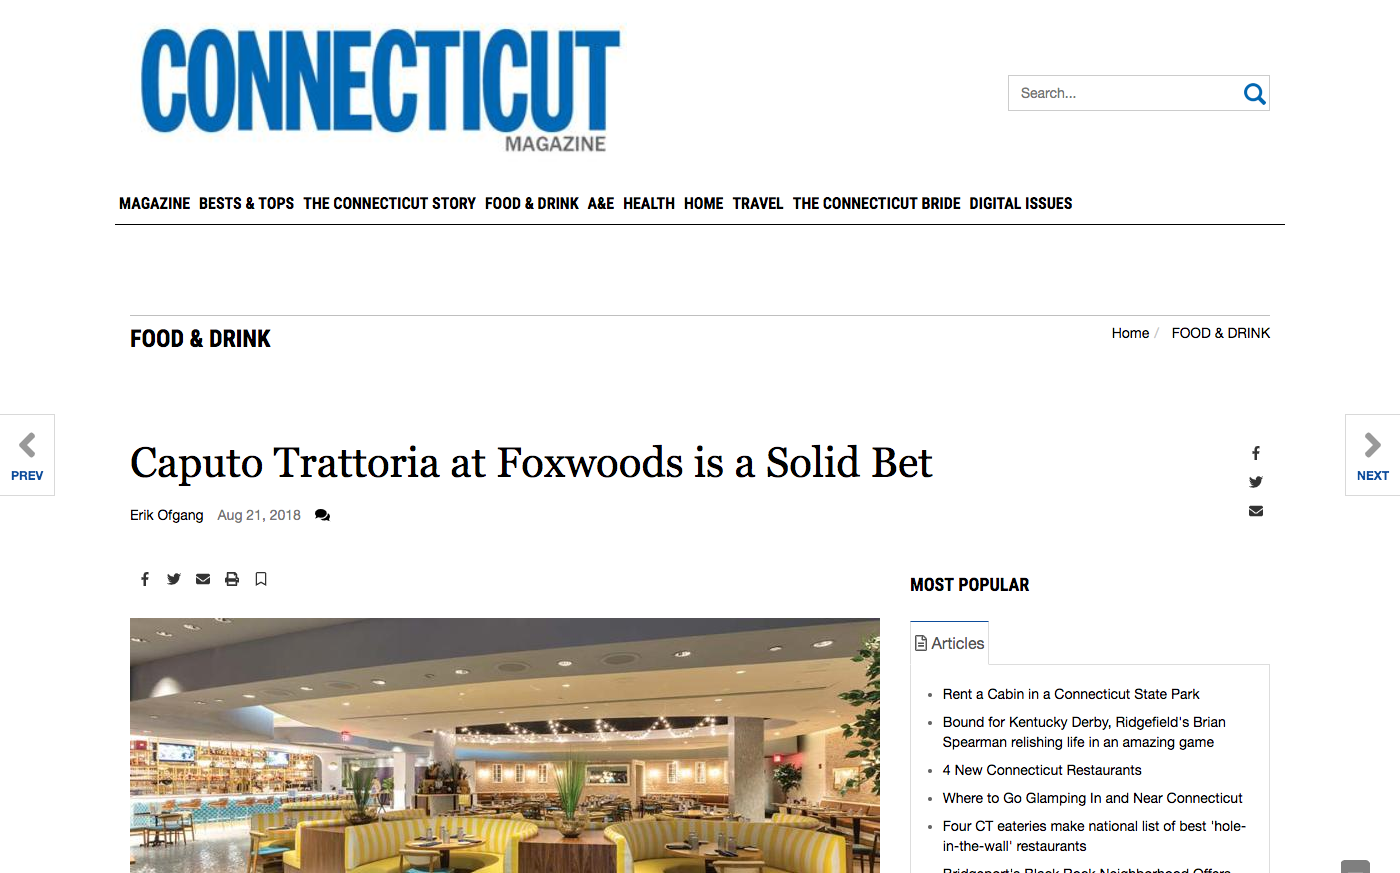 Caputo Trattoria at Foxwoods is a Solid Bet